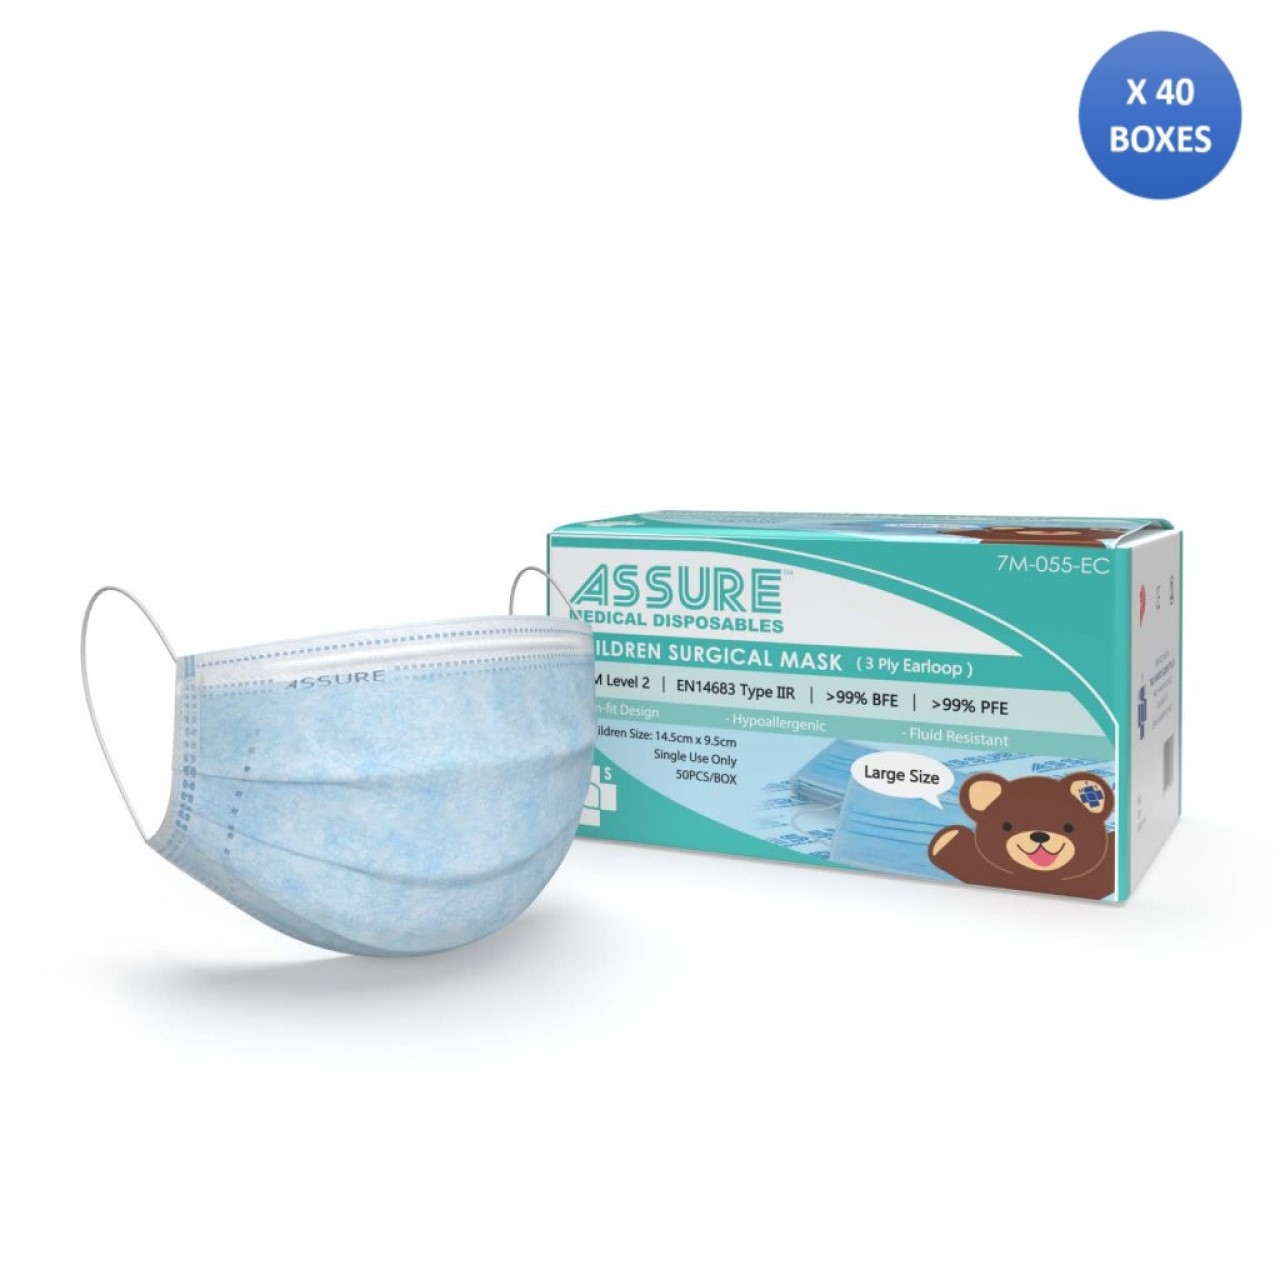 Assure Surgical Child Mask, 3-Ply Earloop (40 Box)